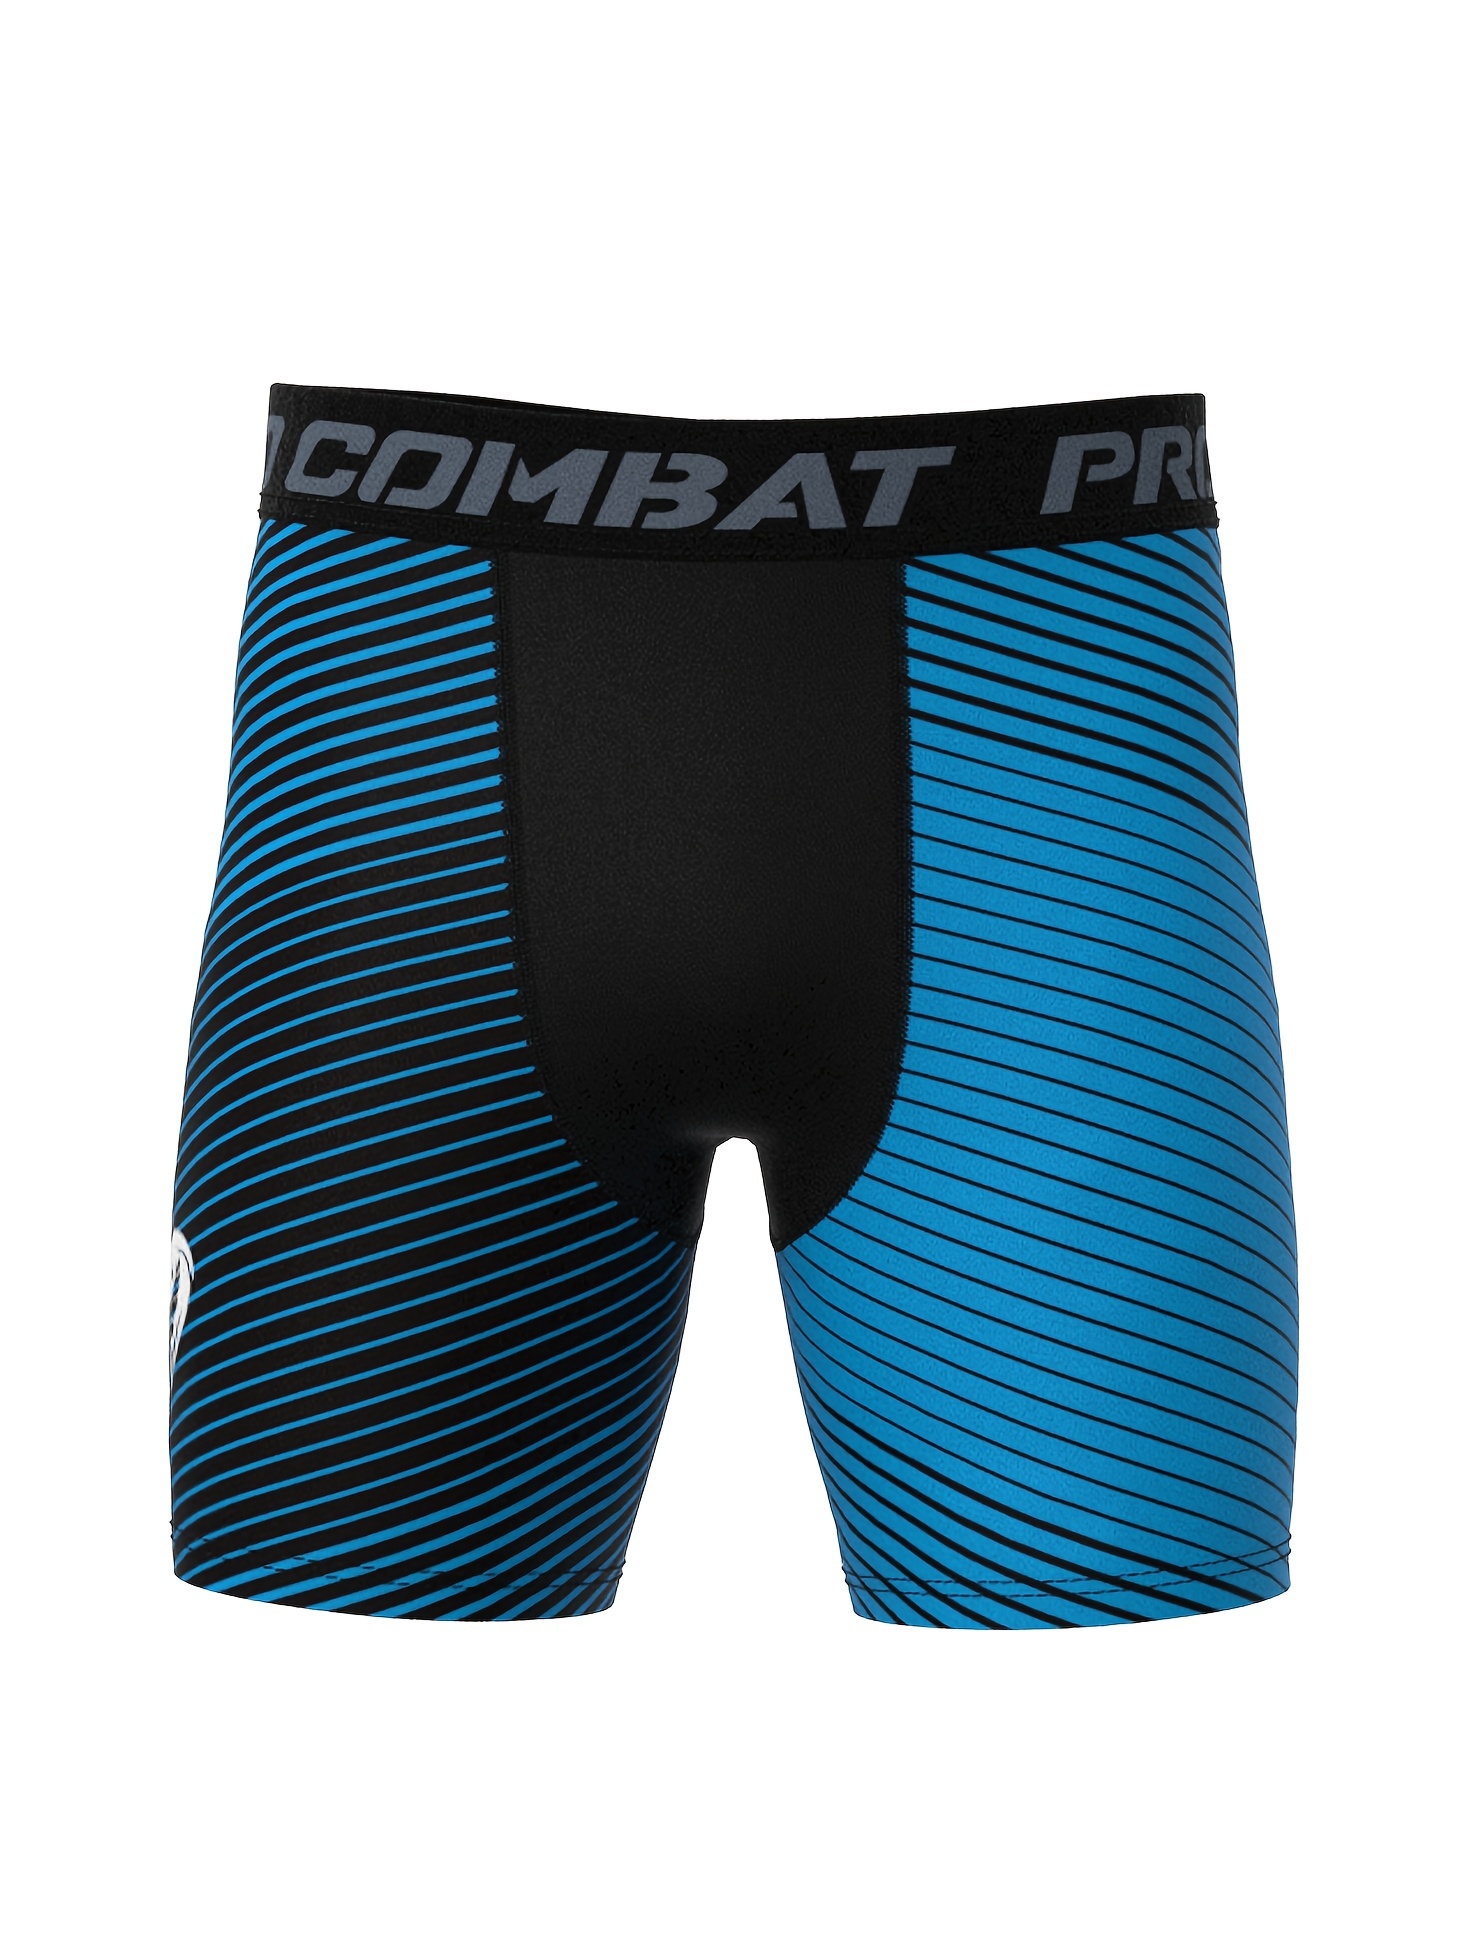 Cross Print Compression Shorts for Men - Quick-Drying, Breathable,  Moisture-Wicking Sport Pants for Basketball, Running, Training, and Fitness